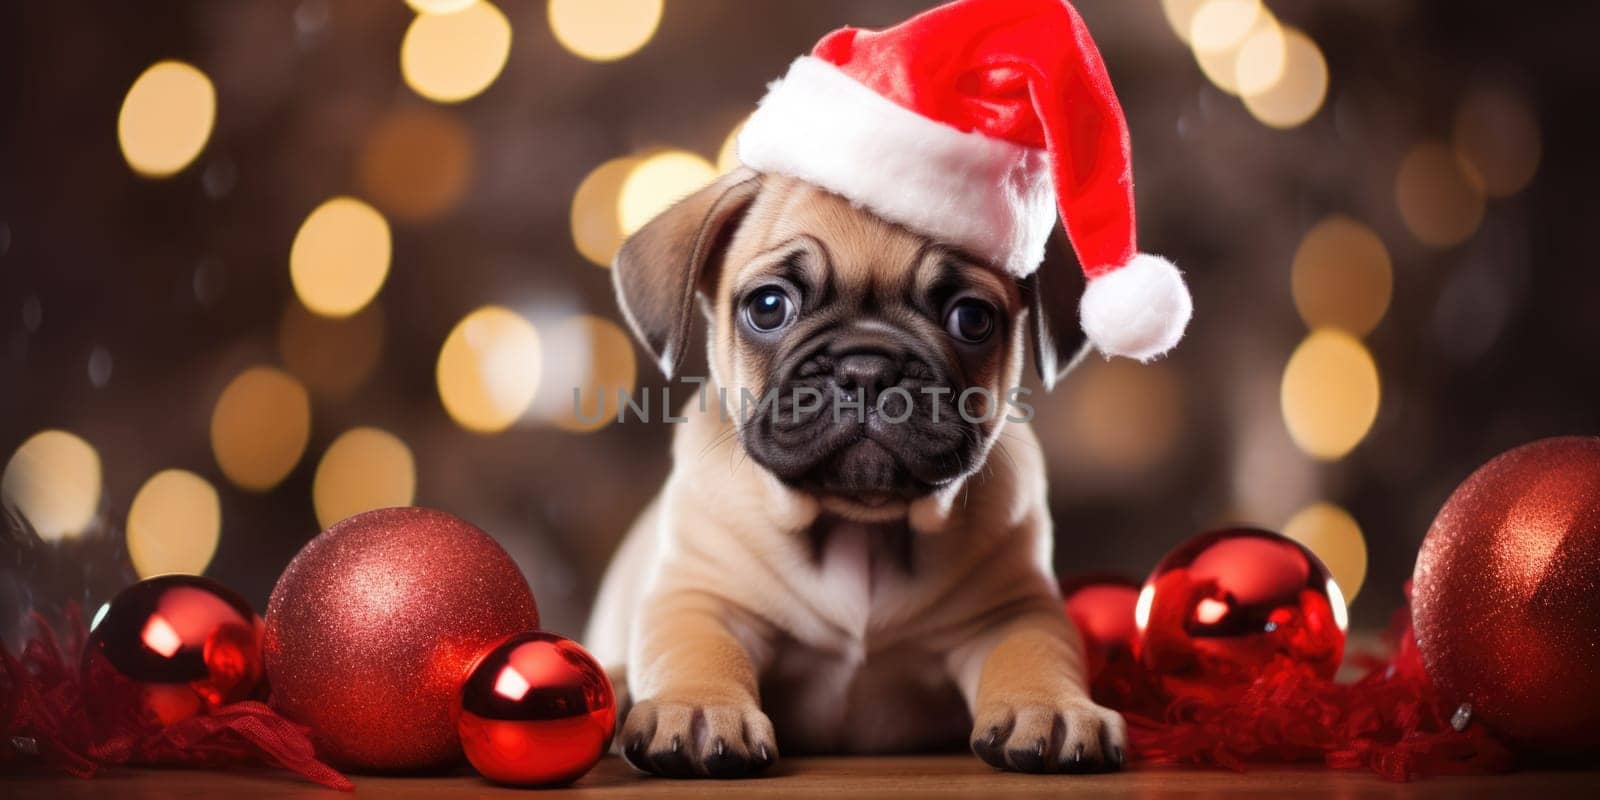 Adorable dog wearing Santa hats at room decorated for Christmas . Cute pets comeliness by biancoblue